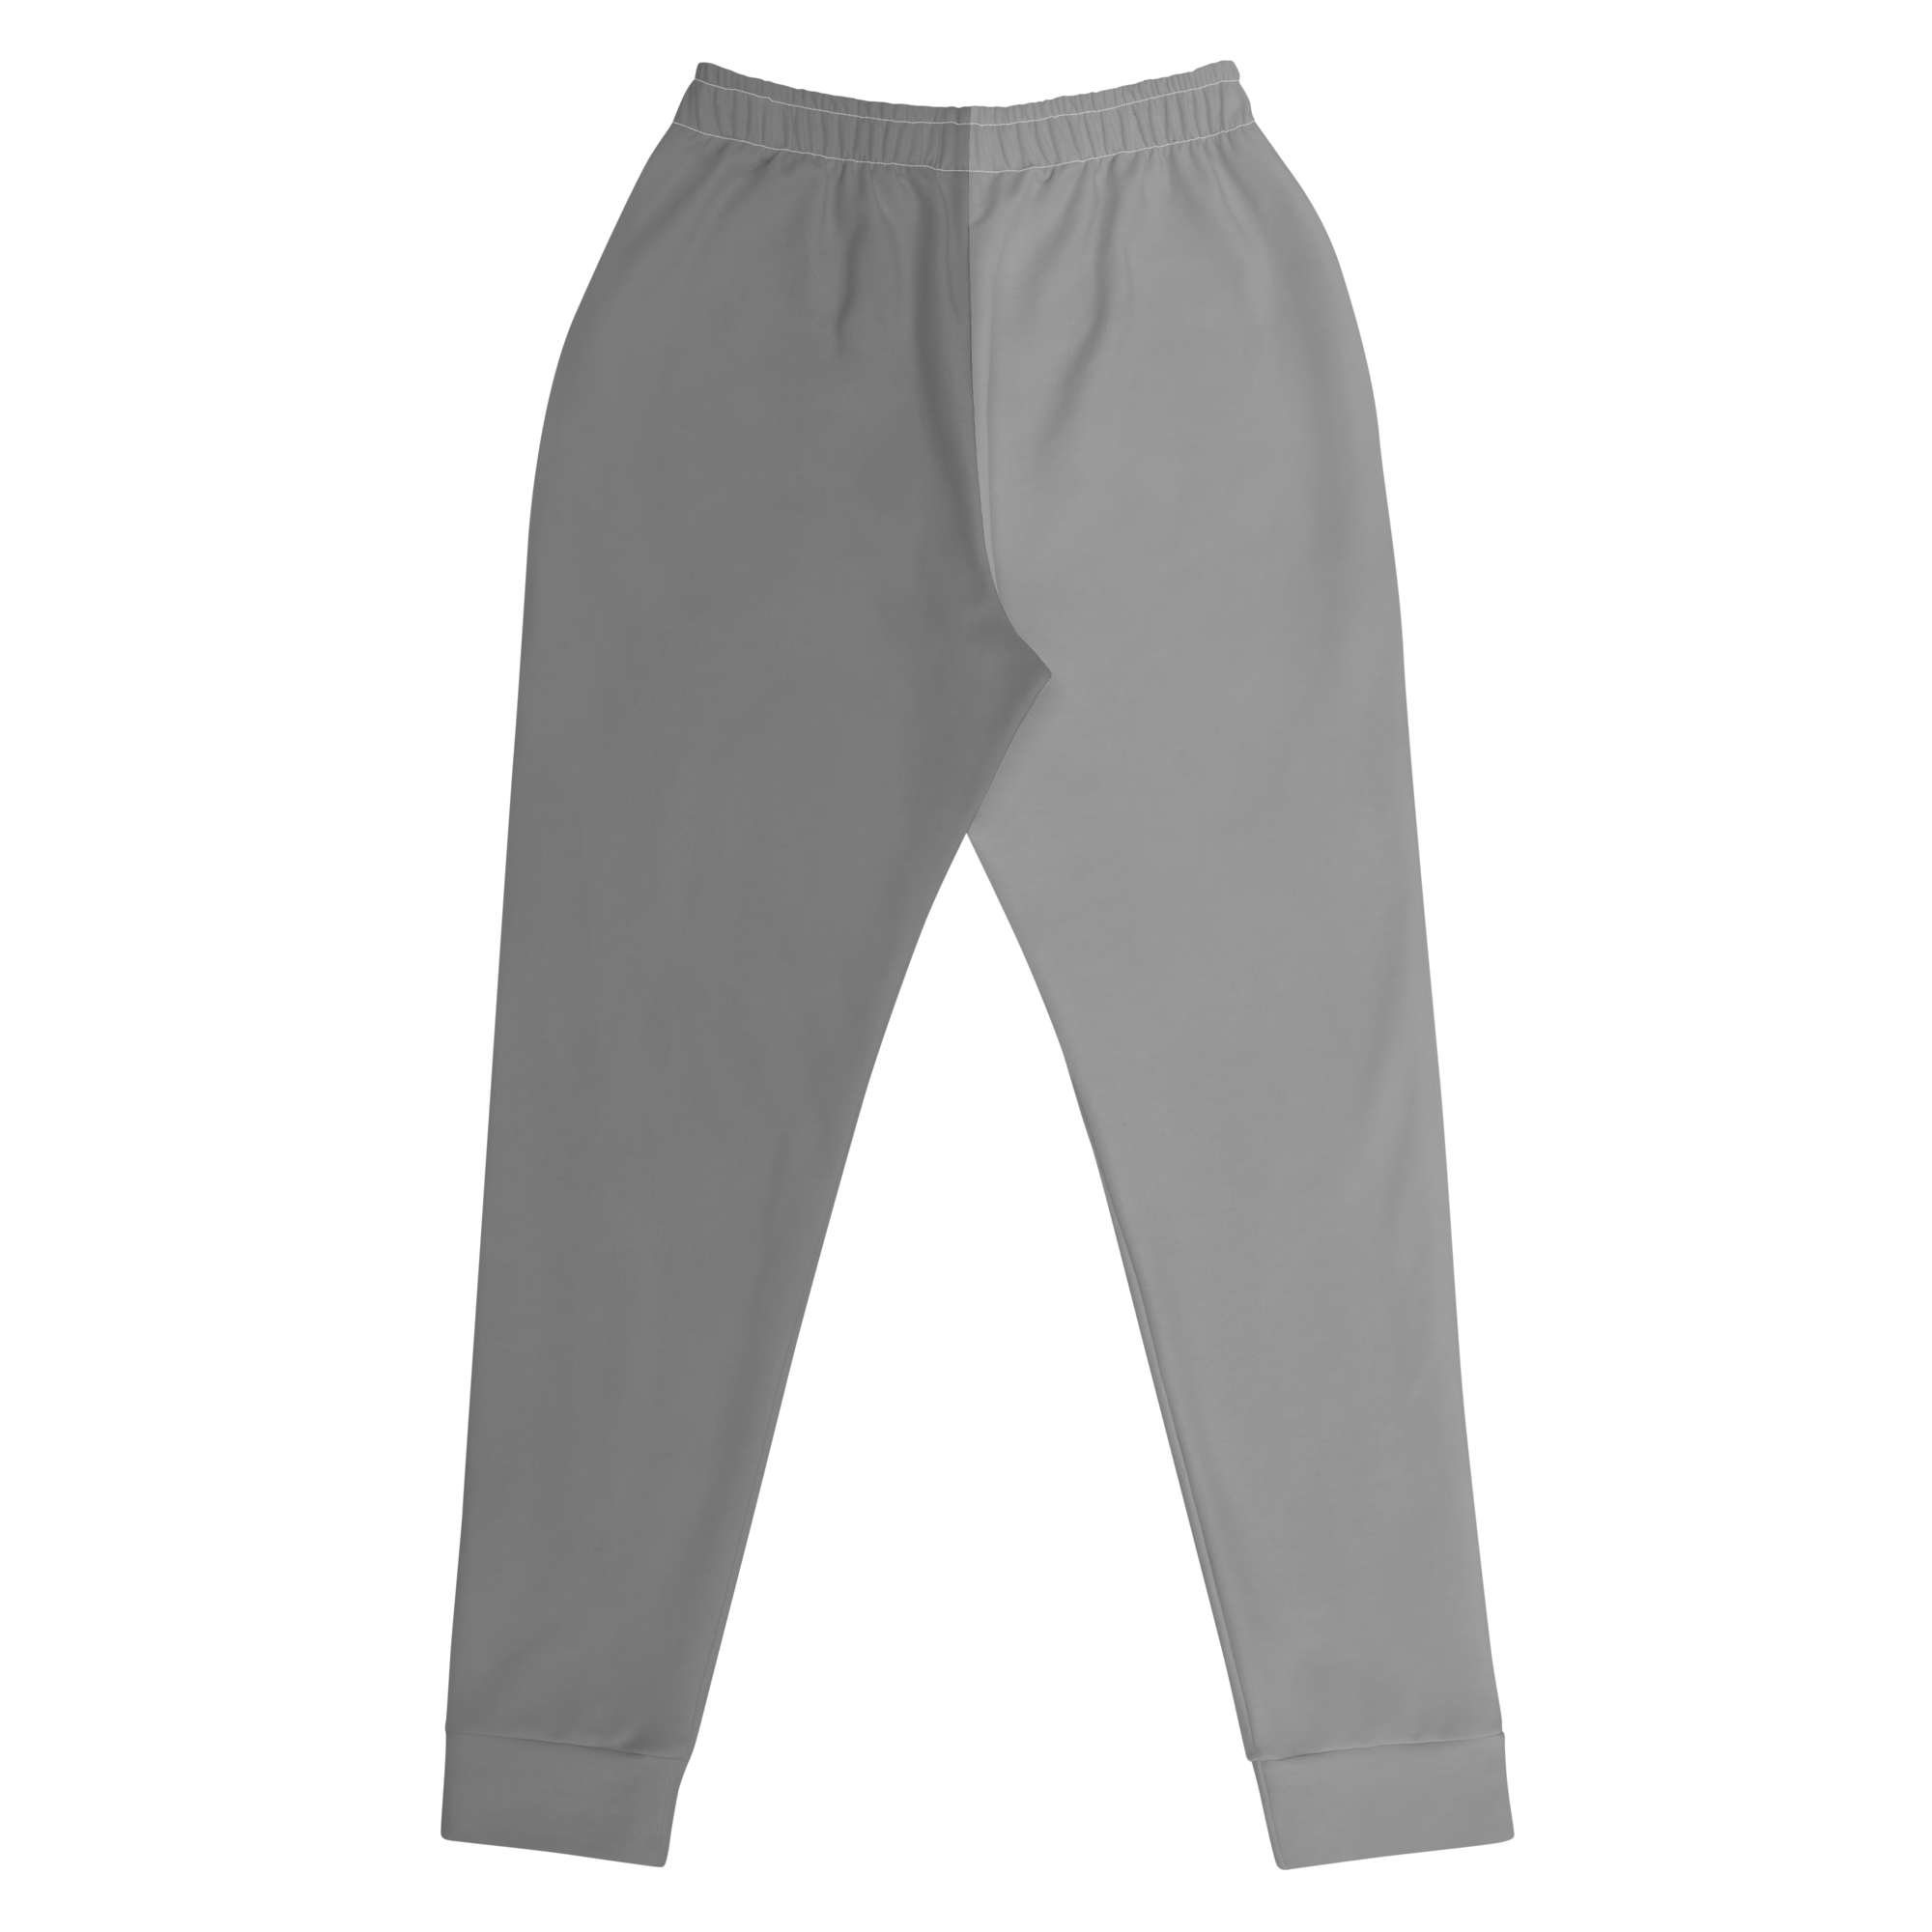 maillot.co | Two-Toned Jogger Sweatpants - Dark Grey/Light Grey back view